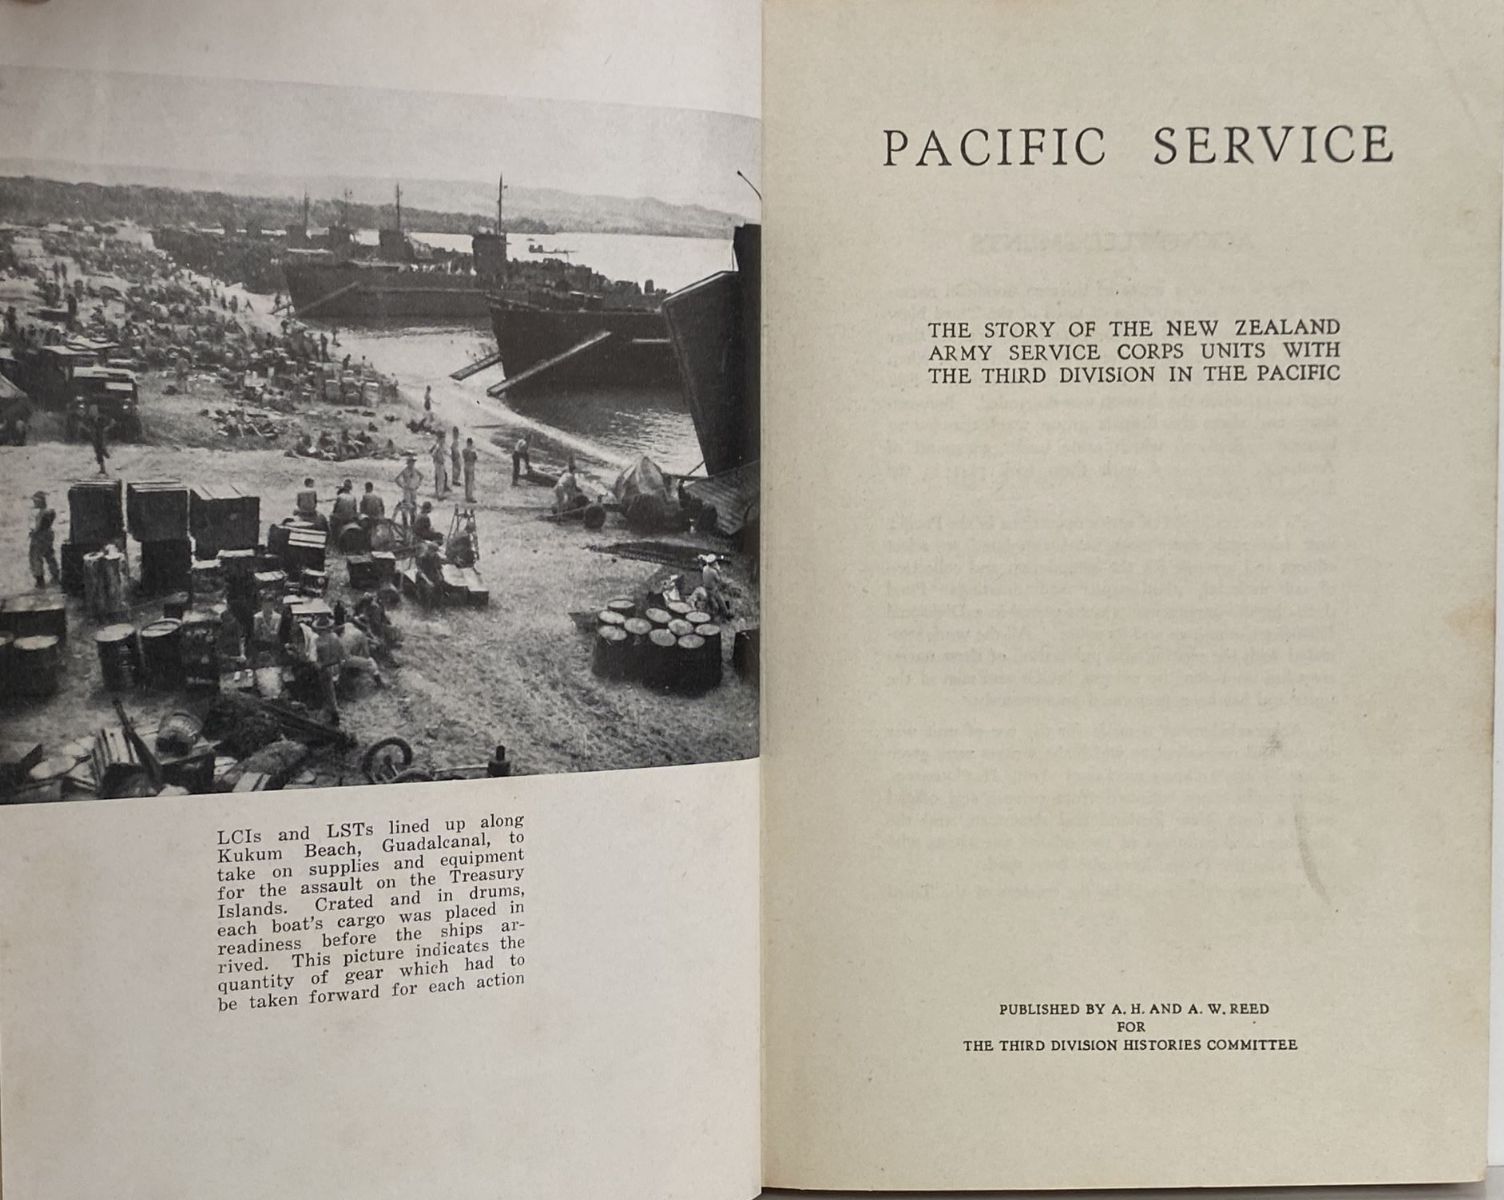 PACIFIC SERVICE: Story of the NZ Army Service Corps Units in the Pacific